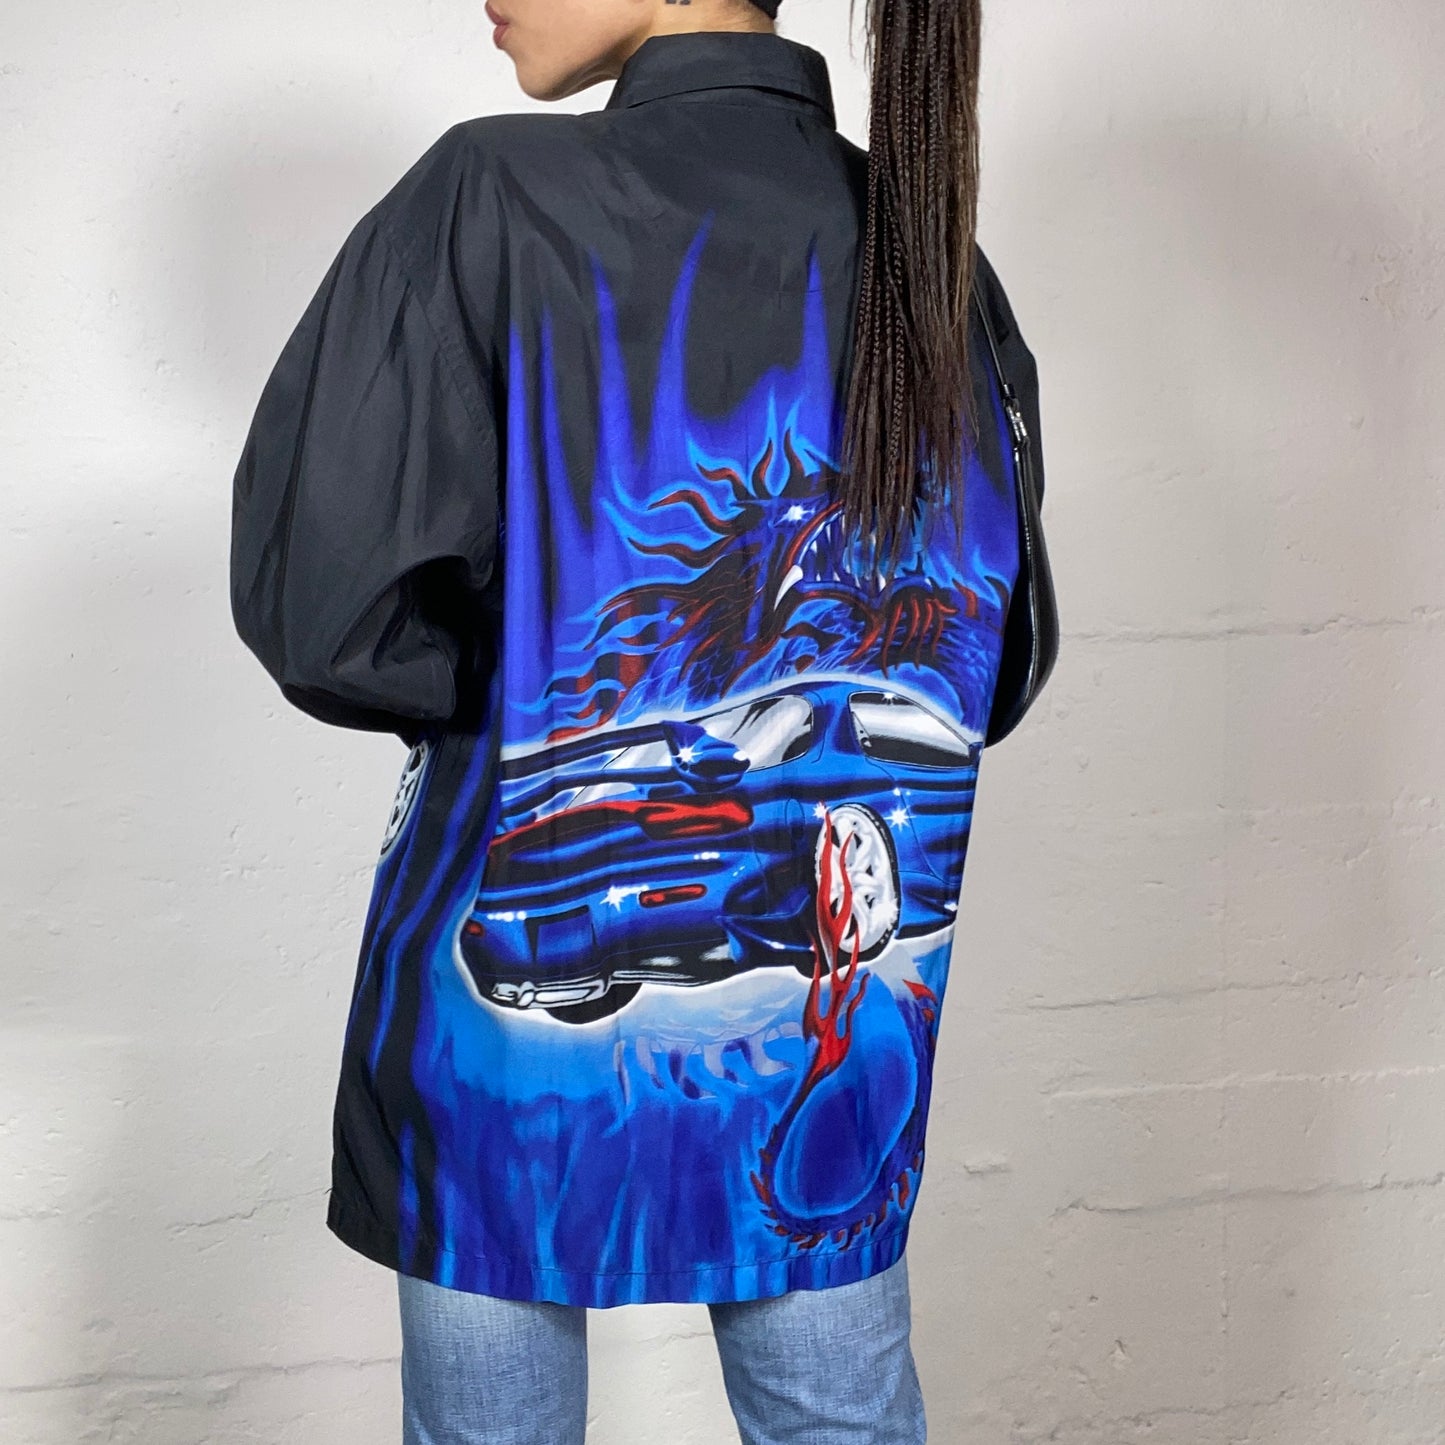 Vintage 2000's Sporty Black Longsleeve Button Up Shirt with Electric Blue Dragon and Racing Car Print (L)